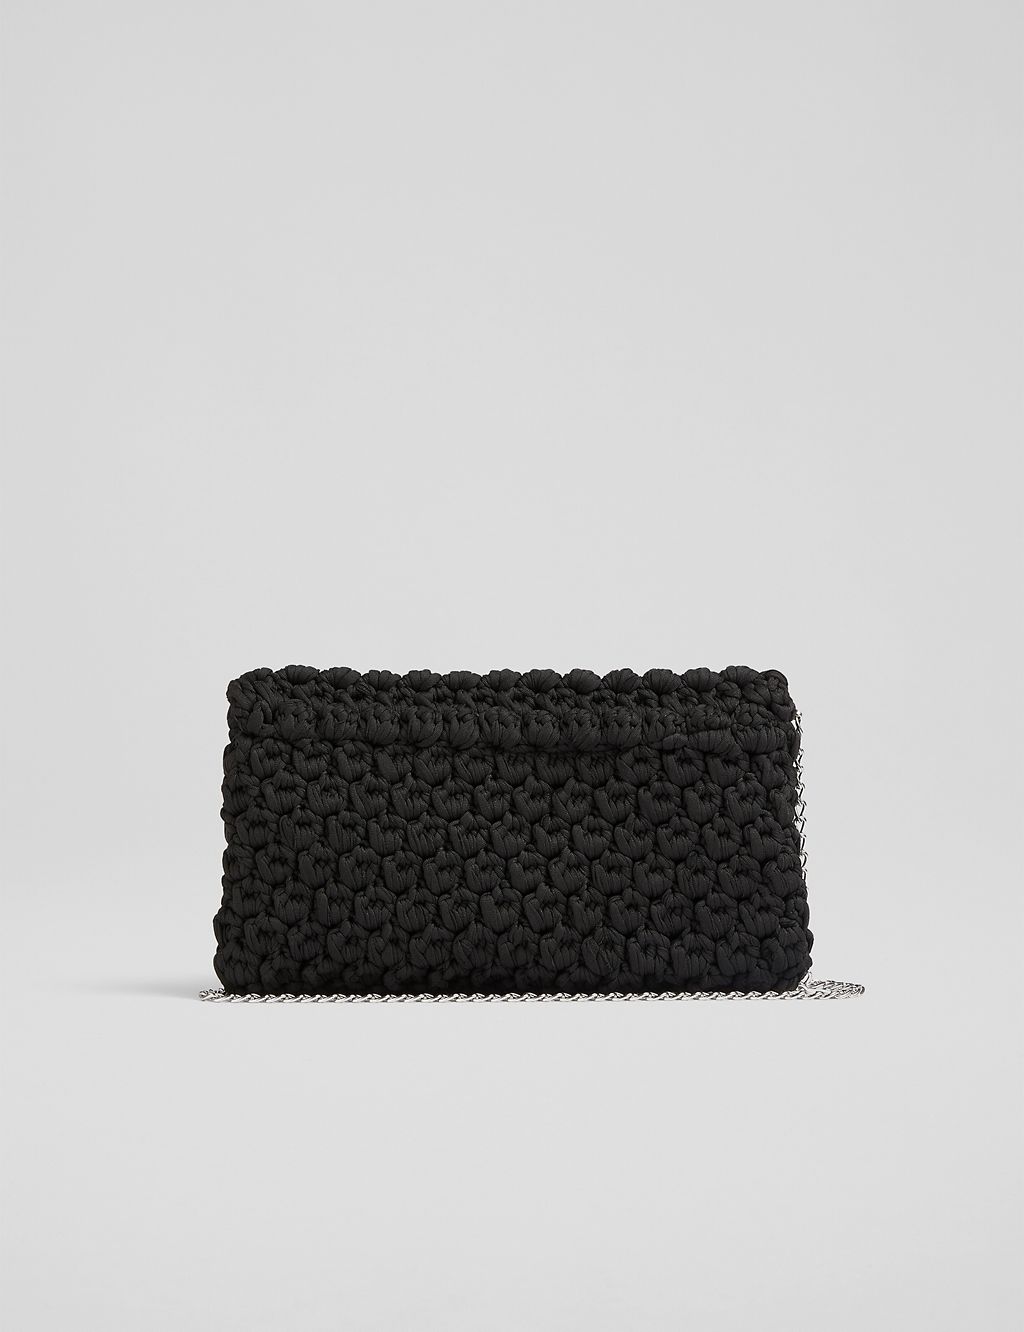 Fabric Woven Chain Strap Clutch Bag 2 of 3